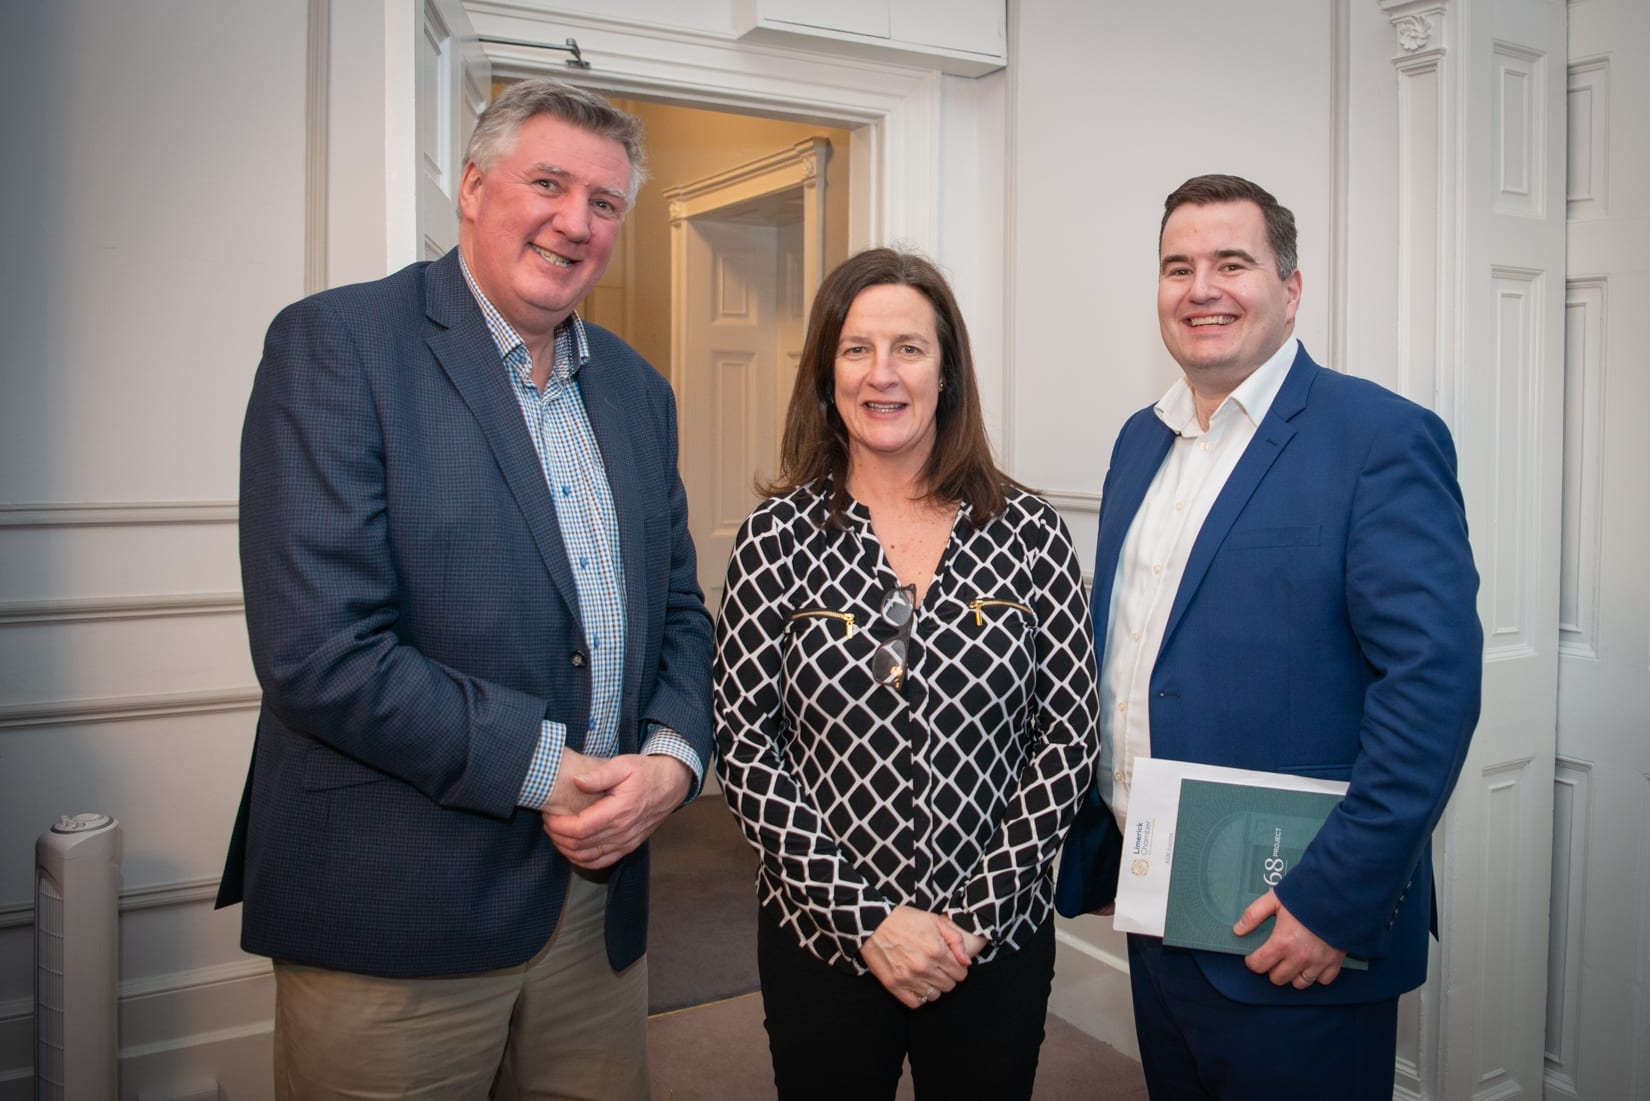 No repro fee-Limerick Chamber AGM 2020 which was held in Limerick Chamber Boardroom on Thursday 27th February - From Left to Right: Dermot Graham - Limerick Chamber, Dr Mary Shire - UL, Donal Cantillon - BOI
Photo credit Shauna Kennedy